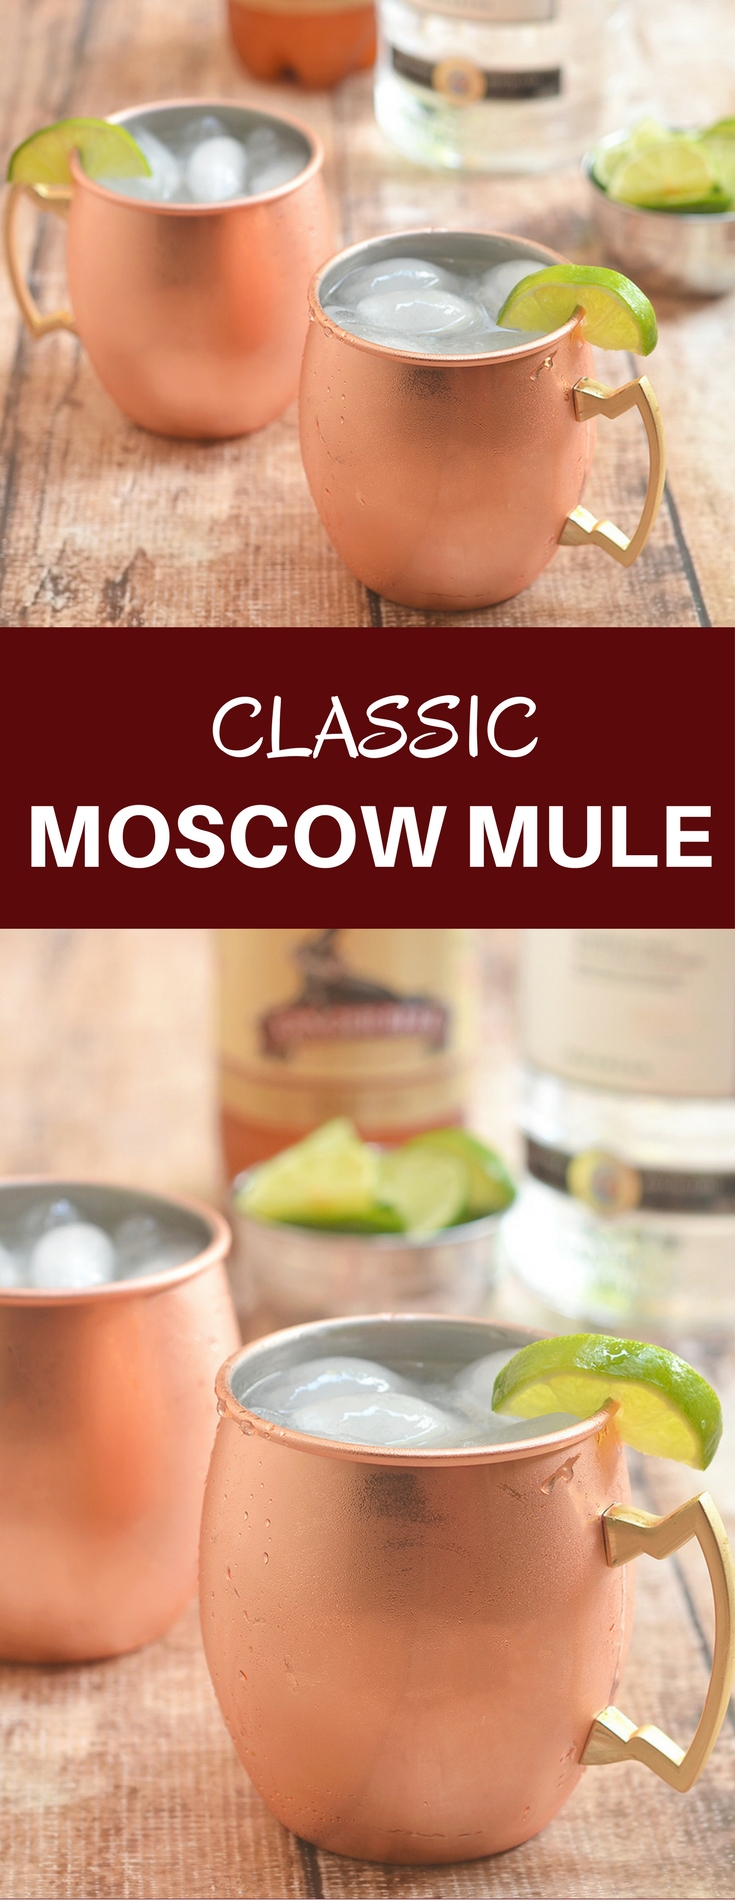 Classic Moscow Mule made with vodka, ginger beer, and lime juice. Tart and refreshing, it's a fun cocktail perfect for all seasons!